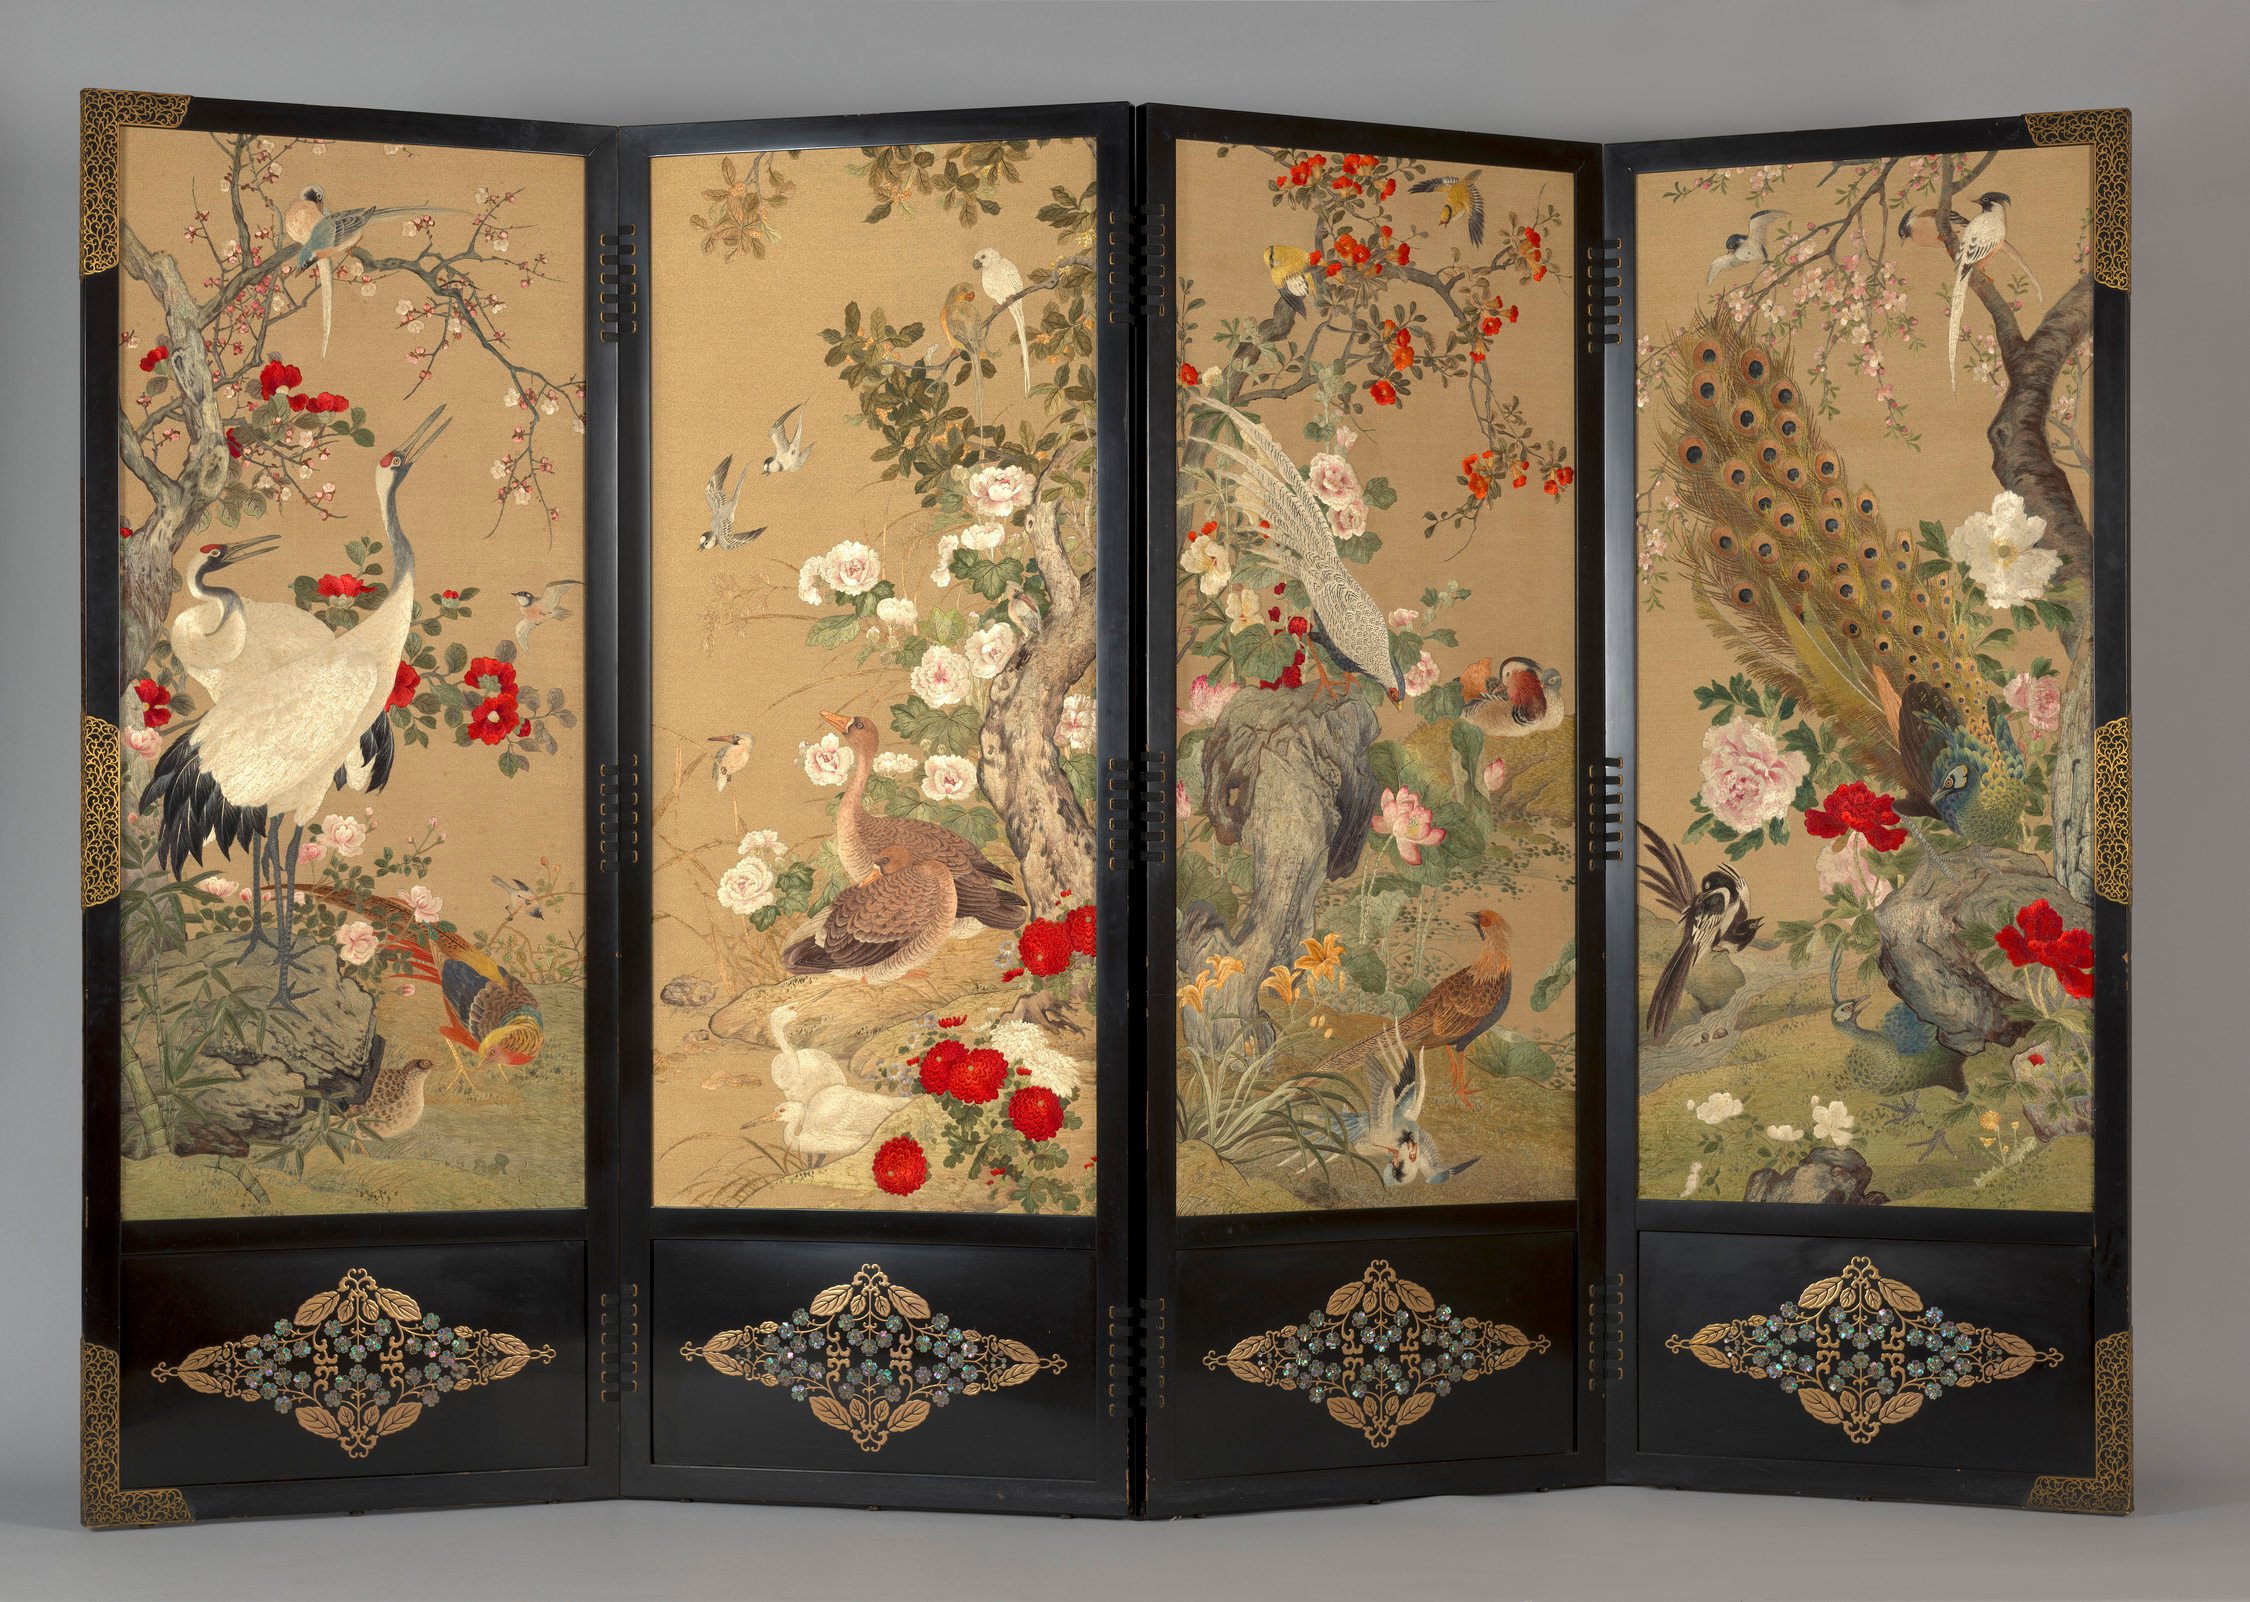 Each of the four panels is fitted with cream silk, which is richly embroidered. The first panel features a pair of cranes standing on rocks and grass, with a pheasant underneath tree peony and cherry-blossom branches. The glossy feathers of the cranes are